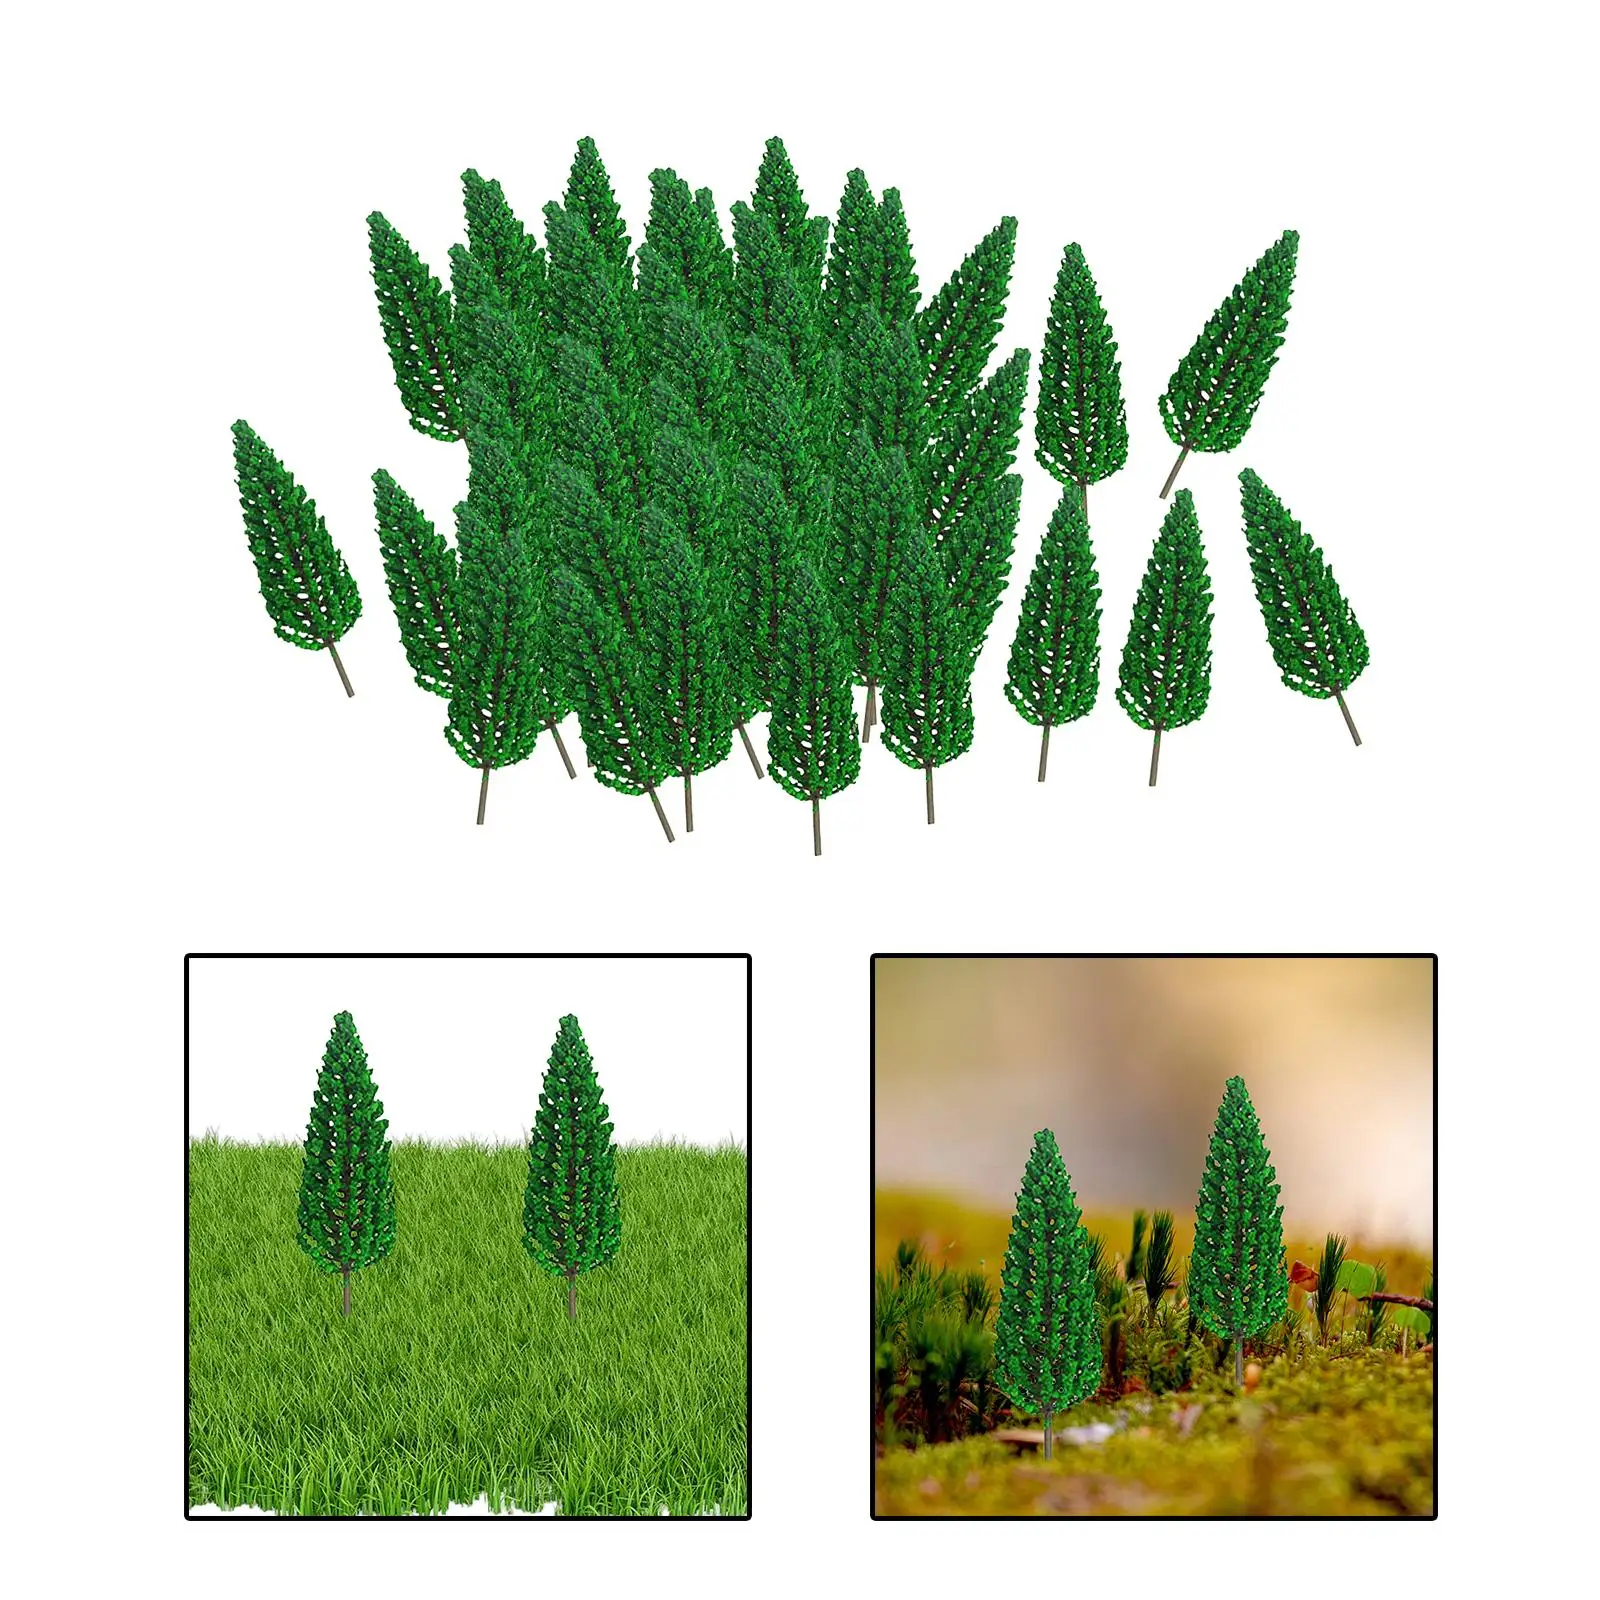 70x Miniature Landscape Trees Train Scenery Architecture Trees Diorama Tree for Building Railroad Sand Table Scenery DIY Crafts